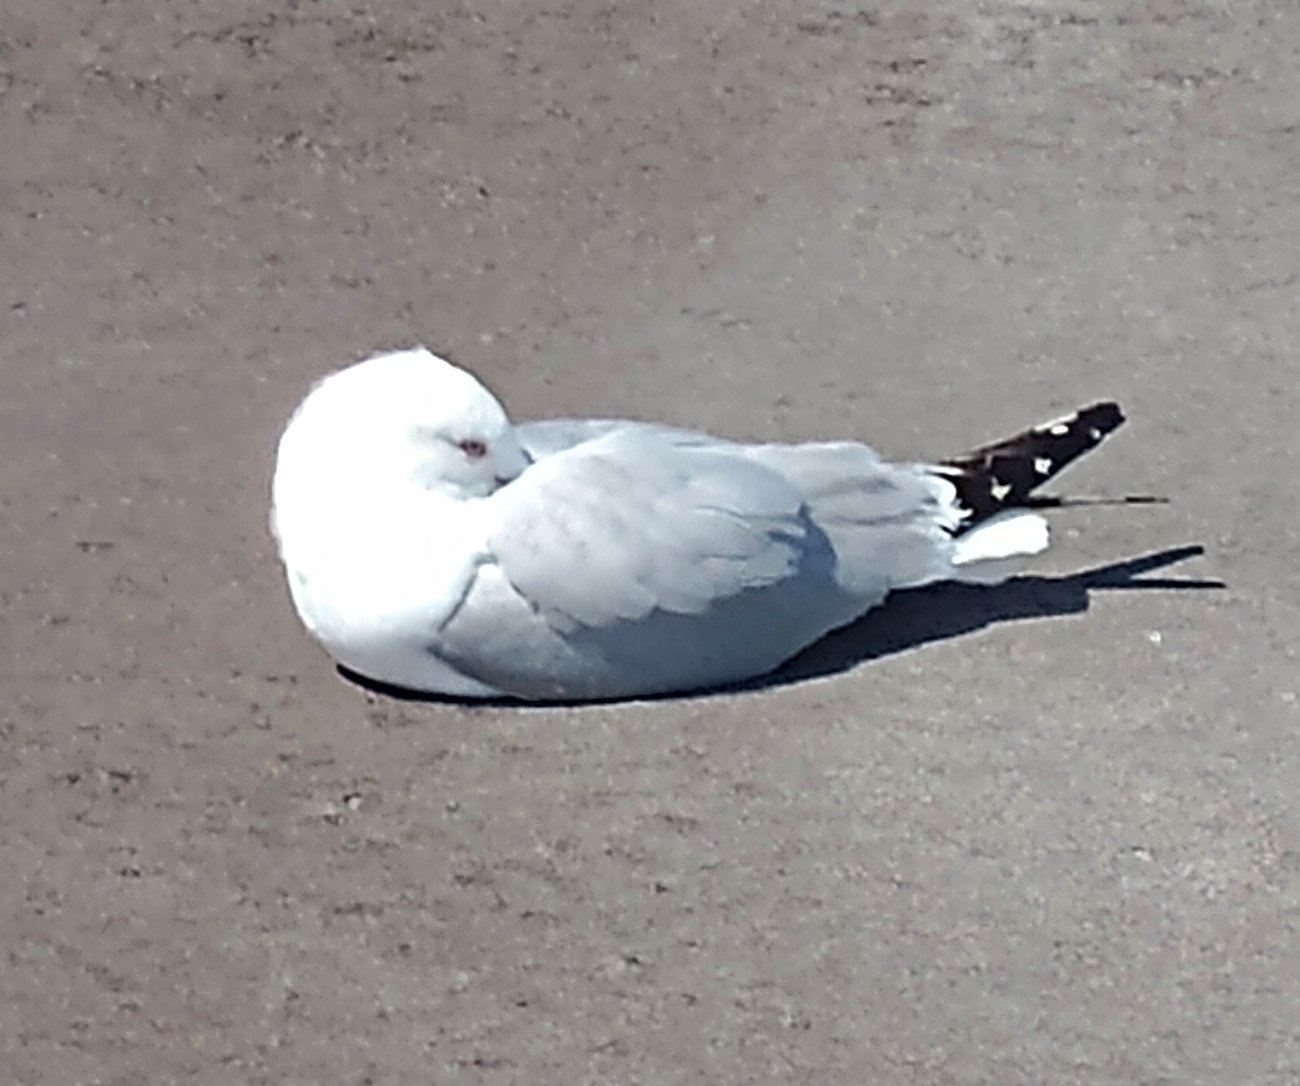 Caught this gull sleeping on the pier. People must feed them a lot because they really didn't care about my being here.